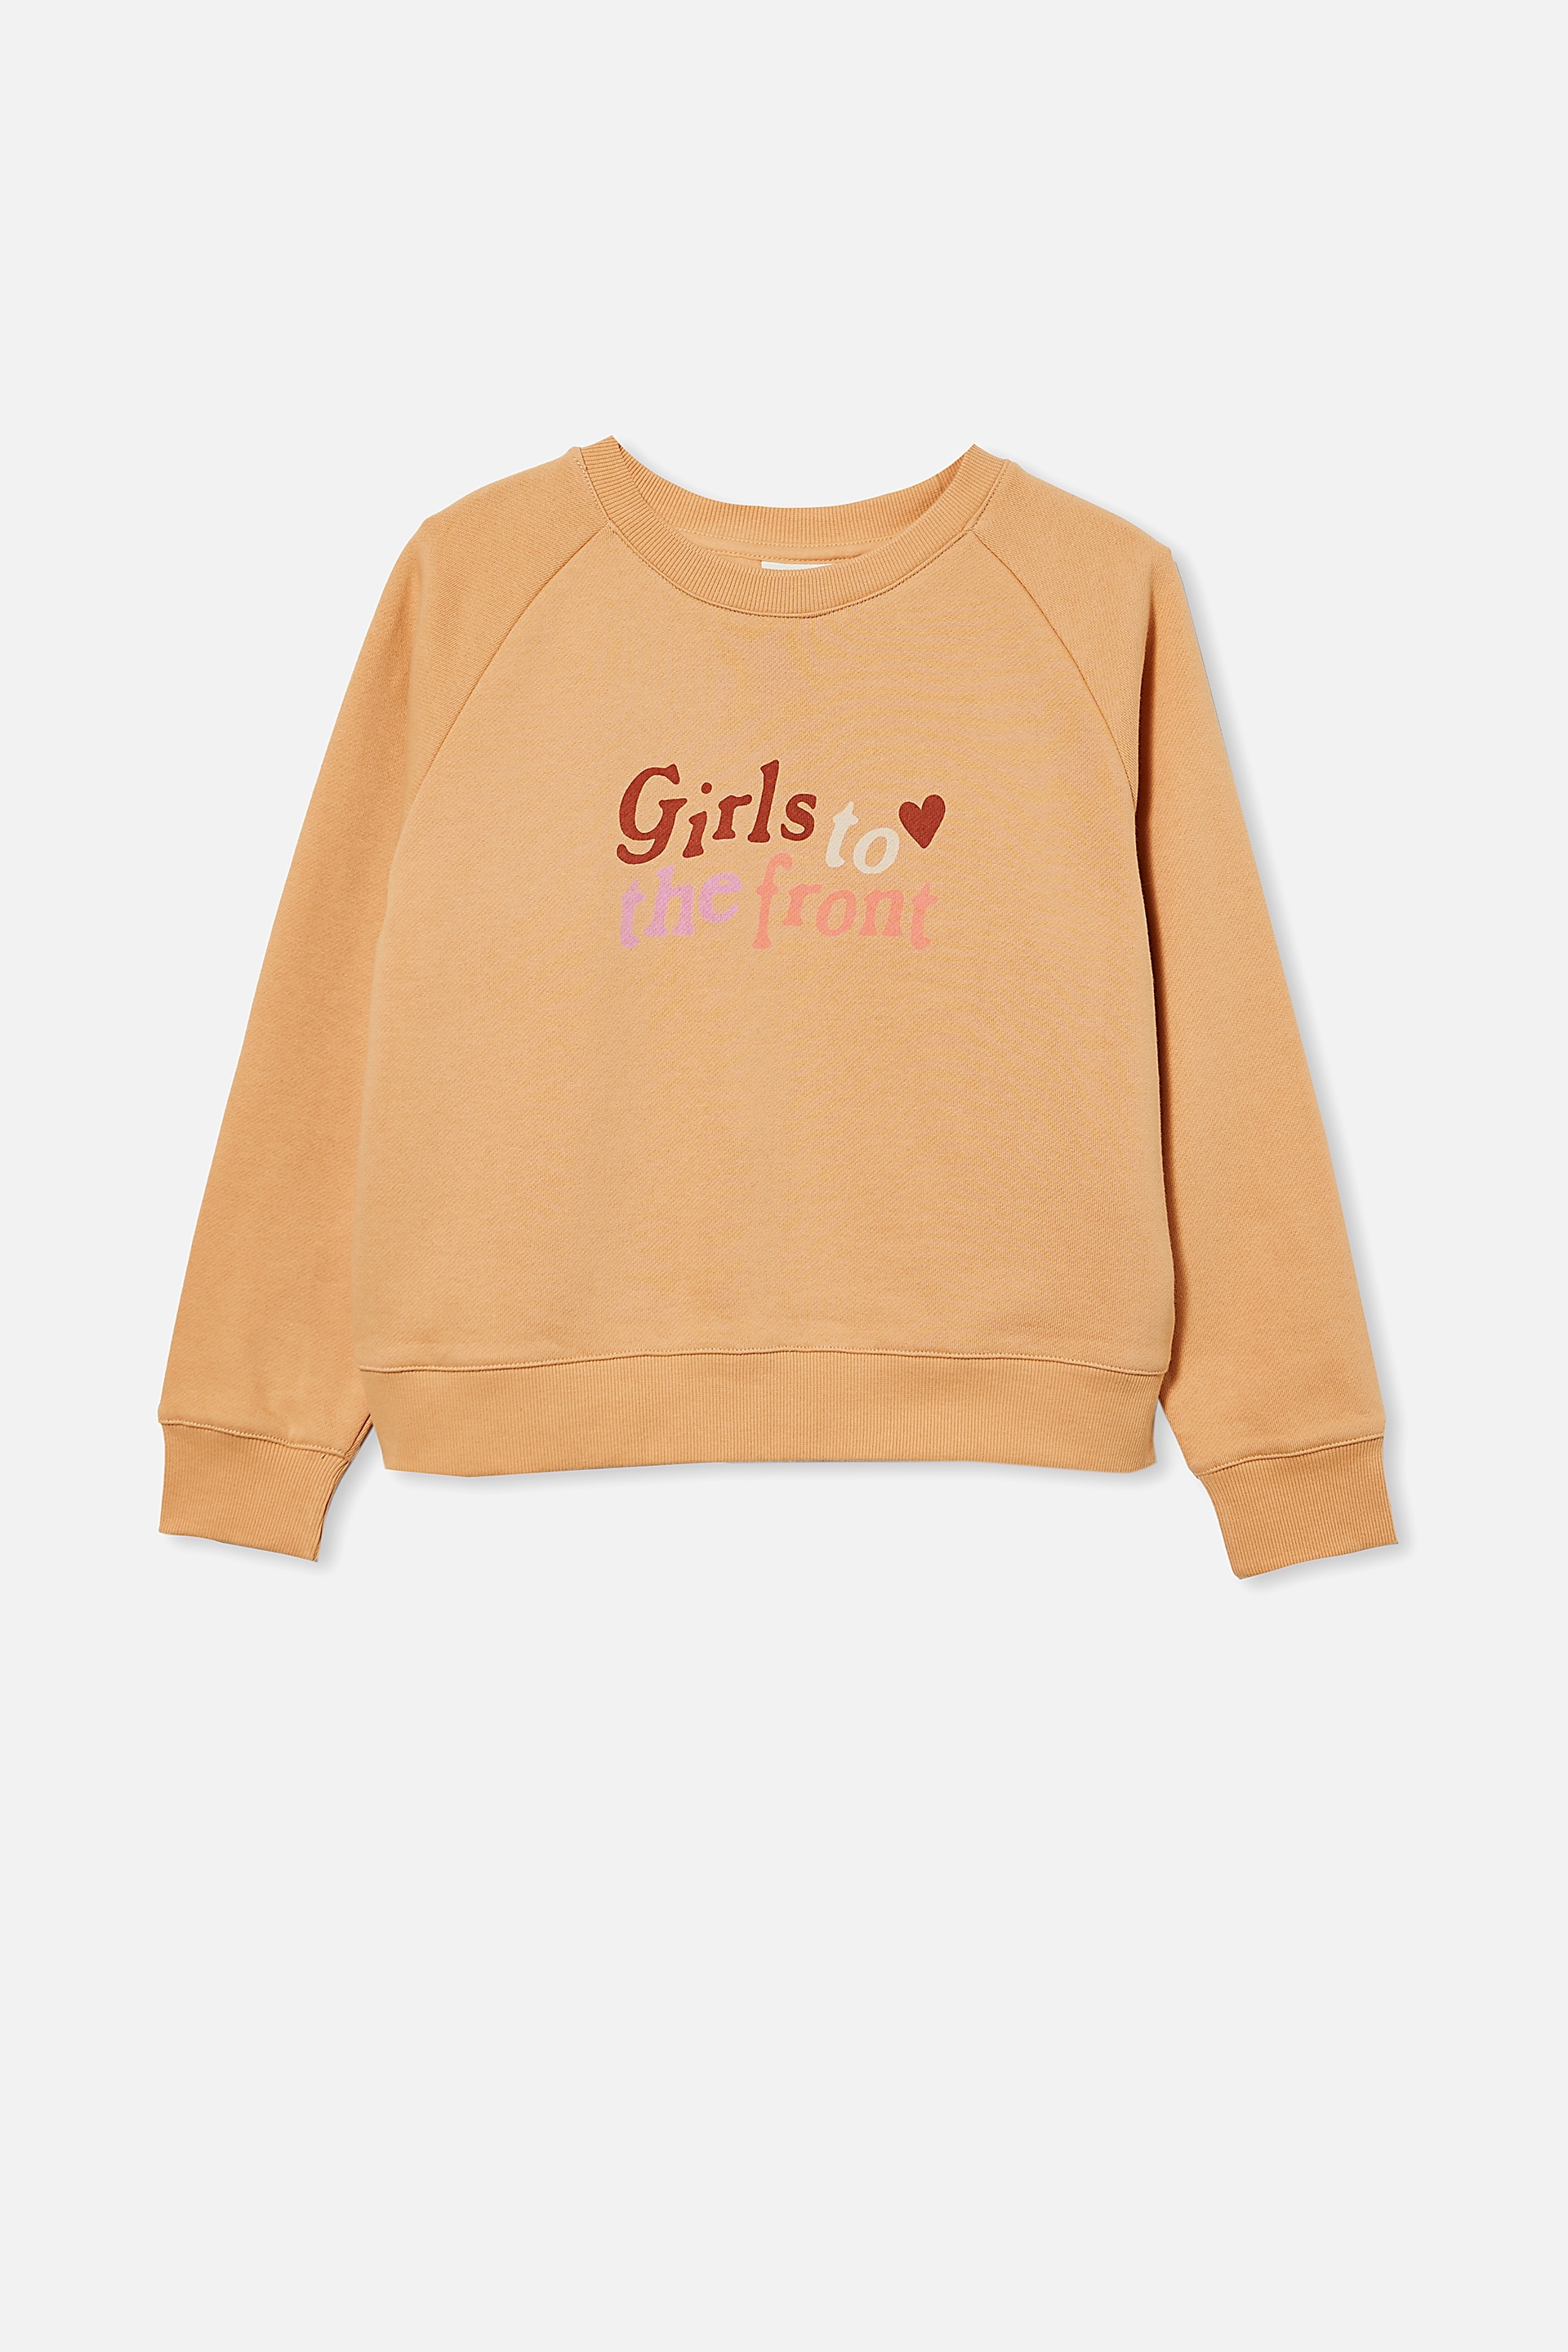 Free by Cotton On - Boxy Crew Neck Jumper - Peachy/ girls to the front